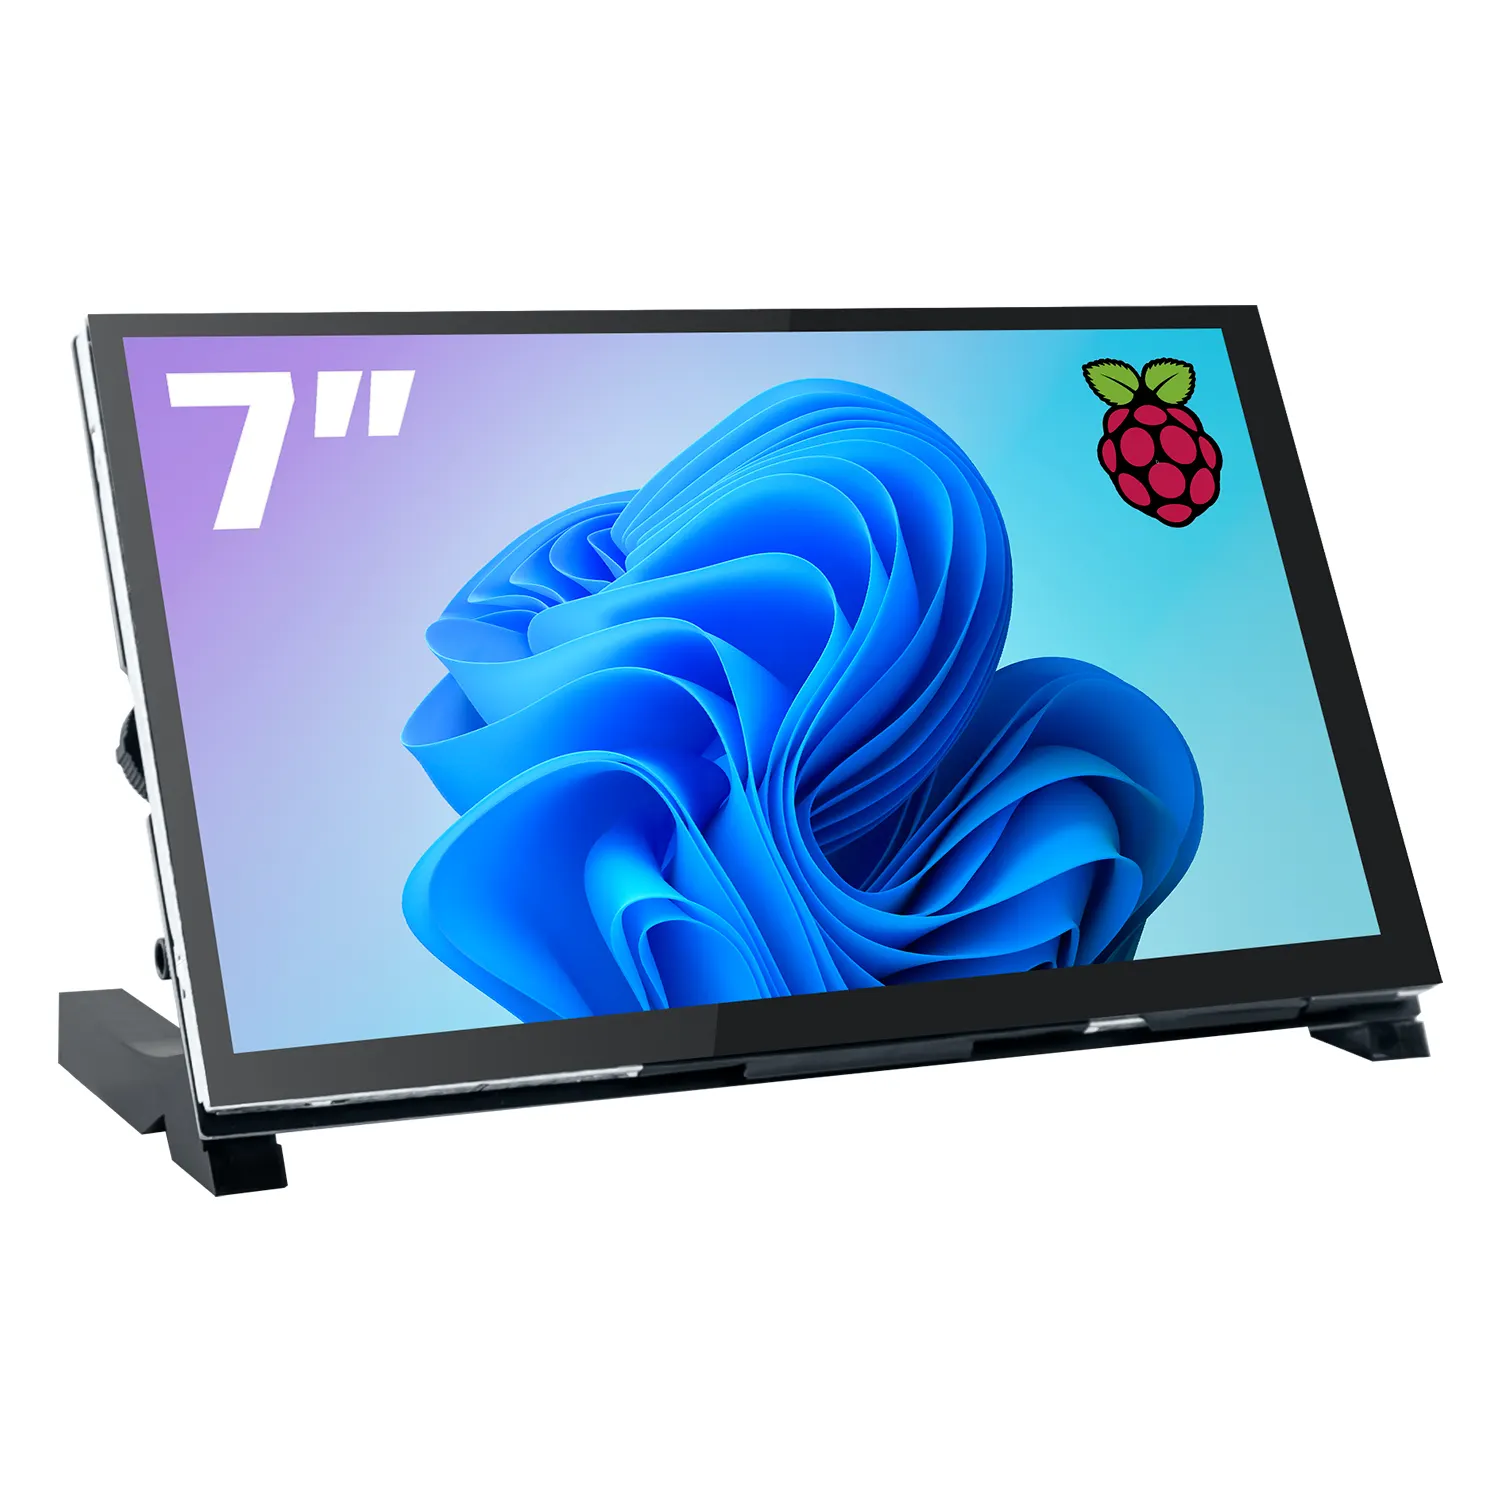 7 Inch Raspberry Pi IPS LCD Touch Screen Raspberry Pi Monitor Display 1024x600 resolution for raspberry pi 3 display